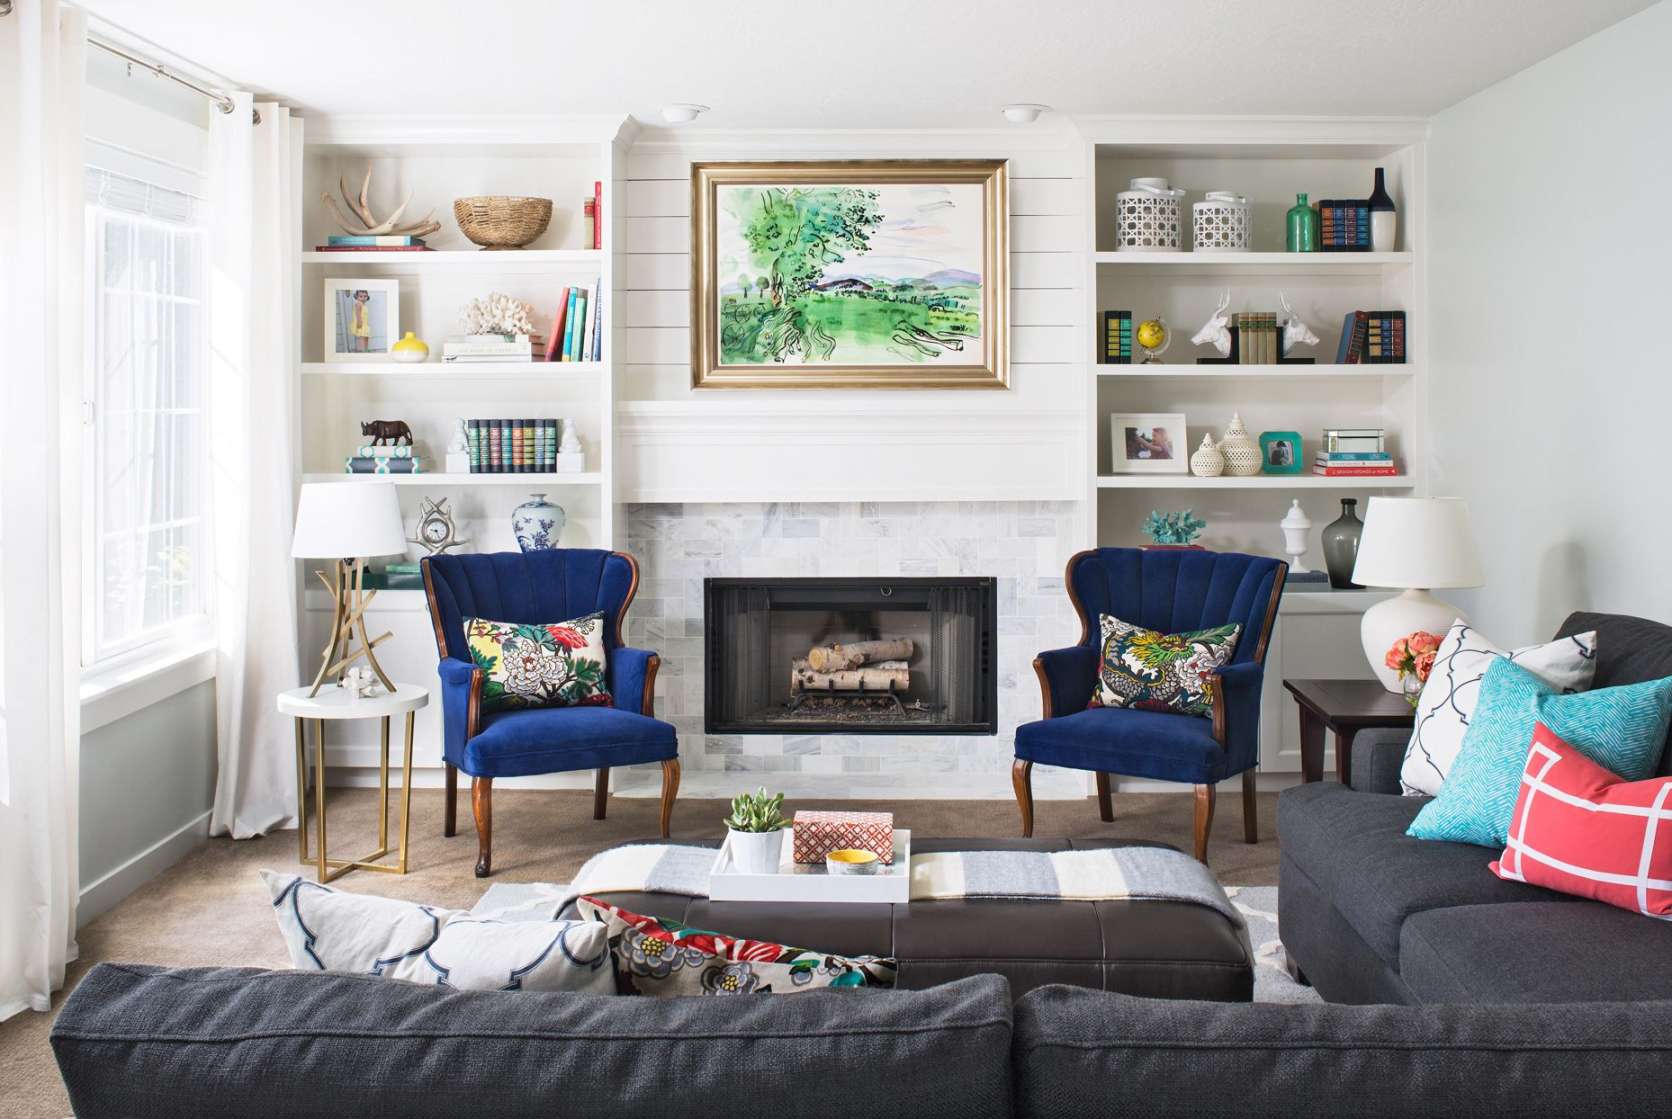 Before-and-After Fireplace Makeovers that Exude Charm and Style